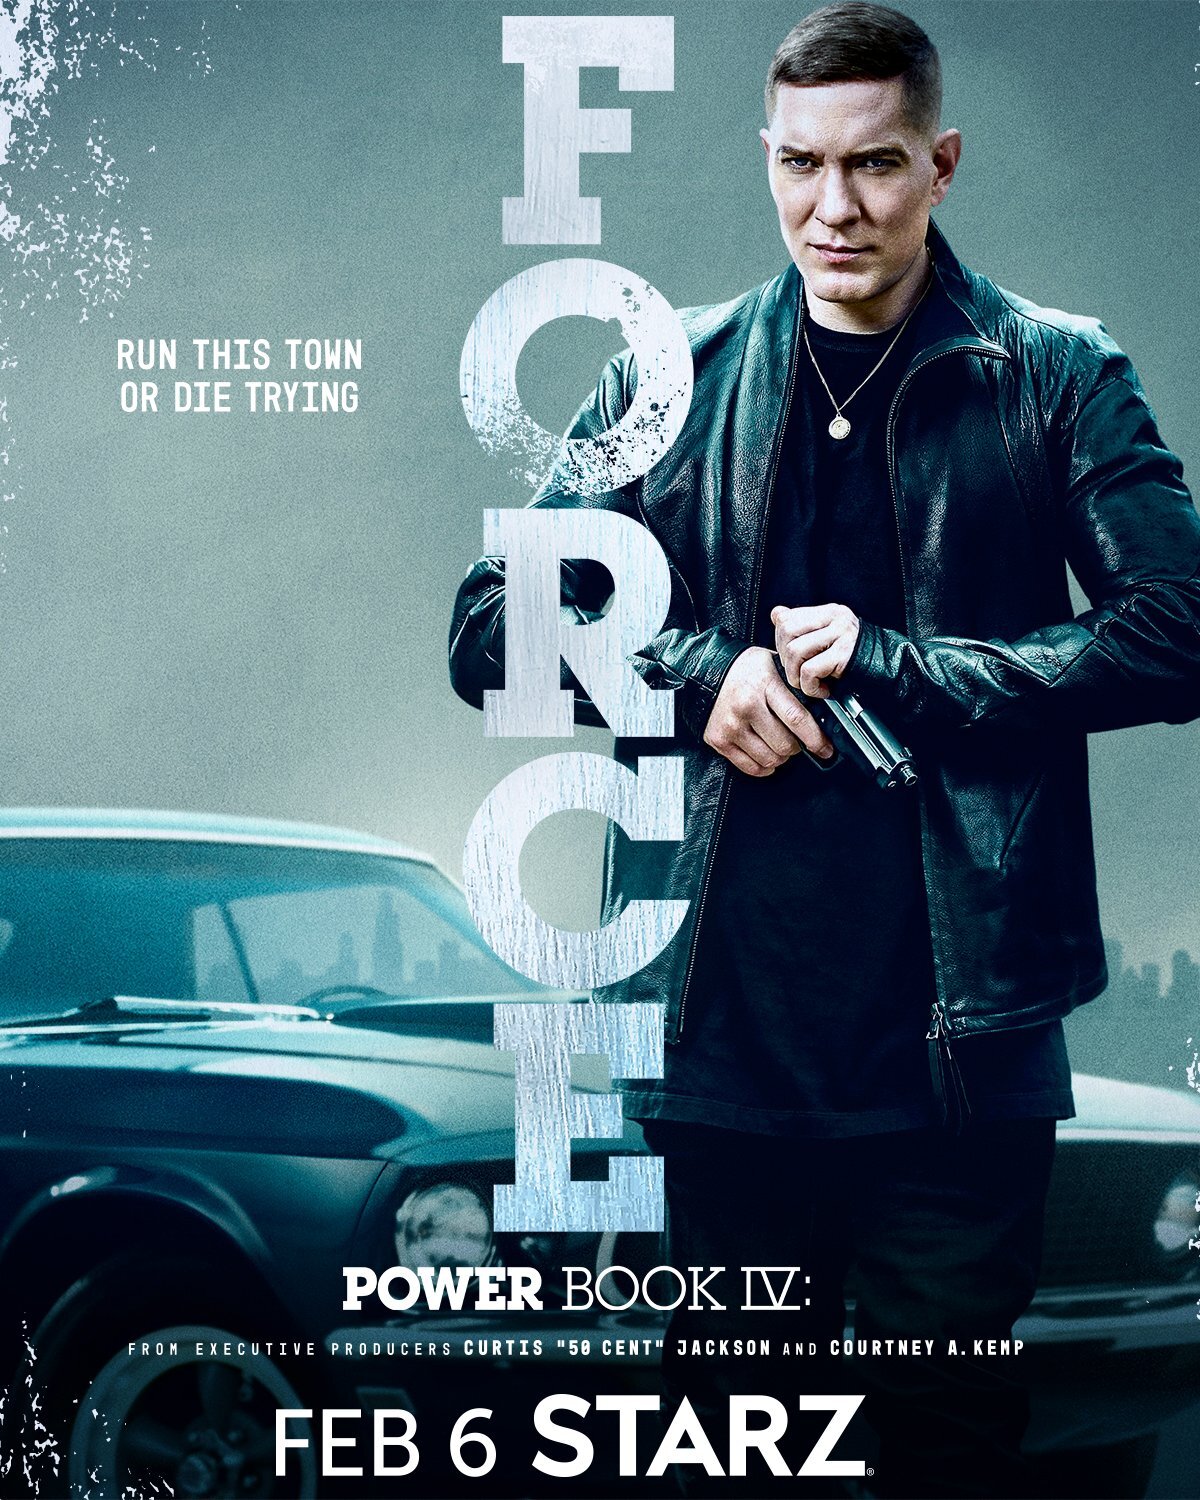 New Clip From Starz Original Series 'Power Book IV: Force' - Season 1, Episode 9